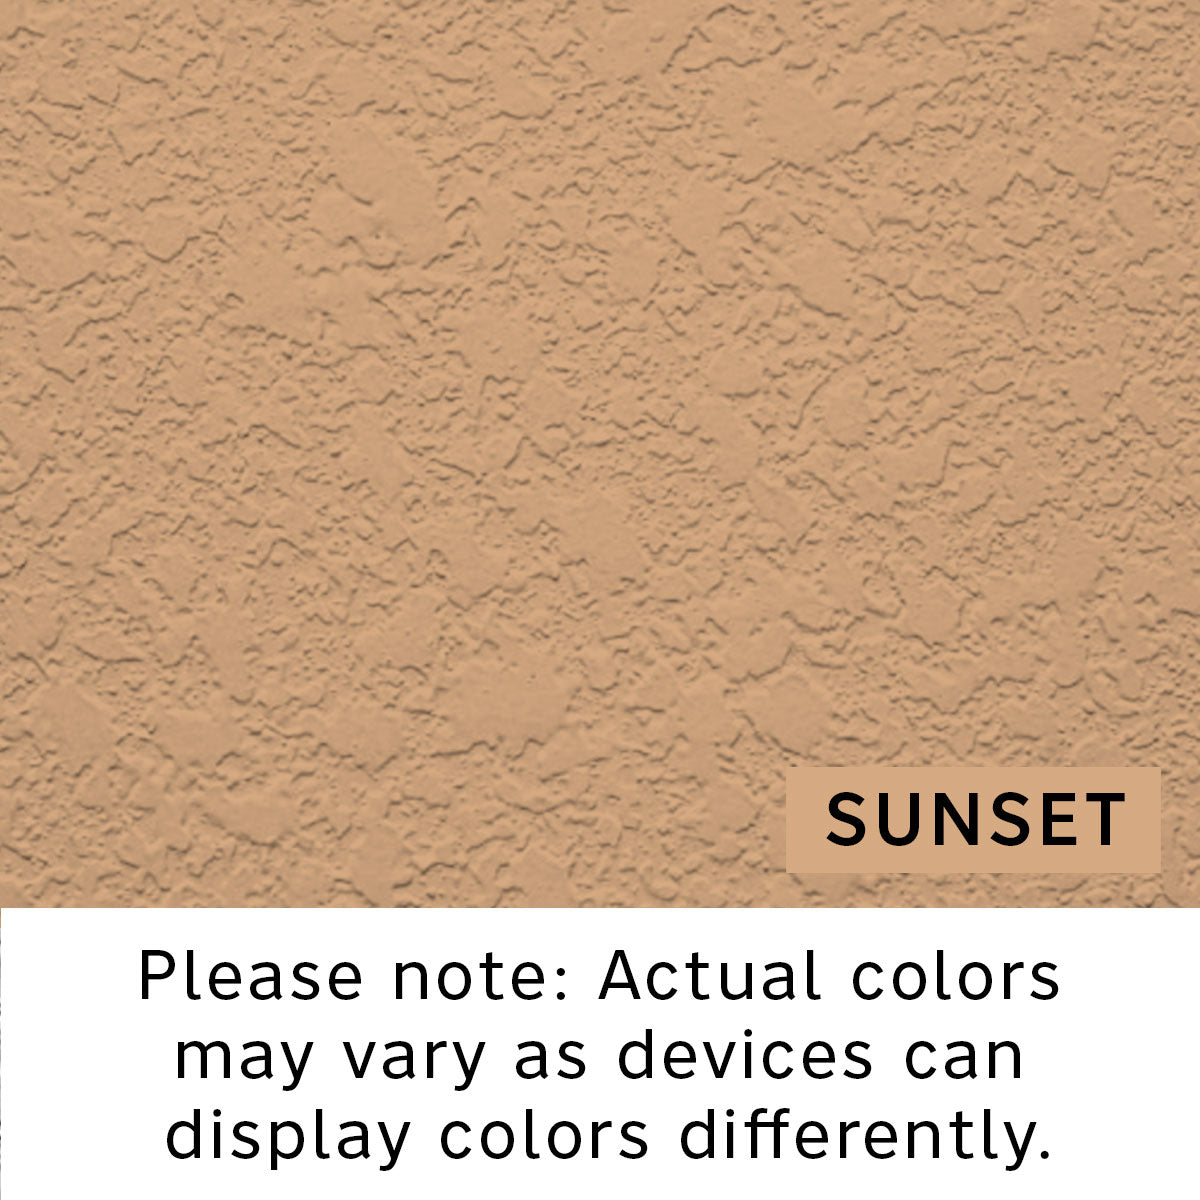 Sunset color swatch